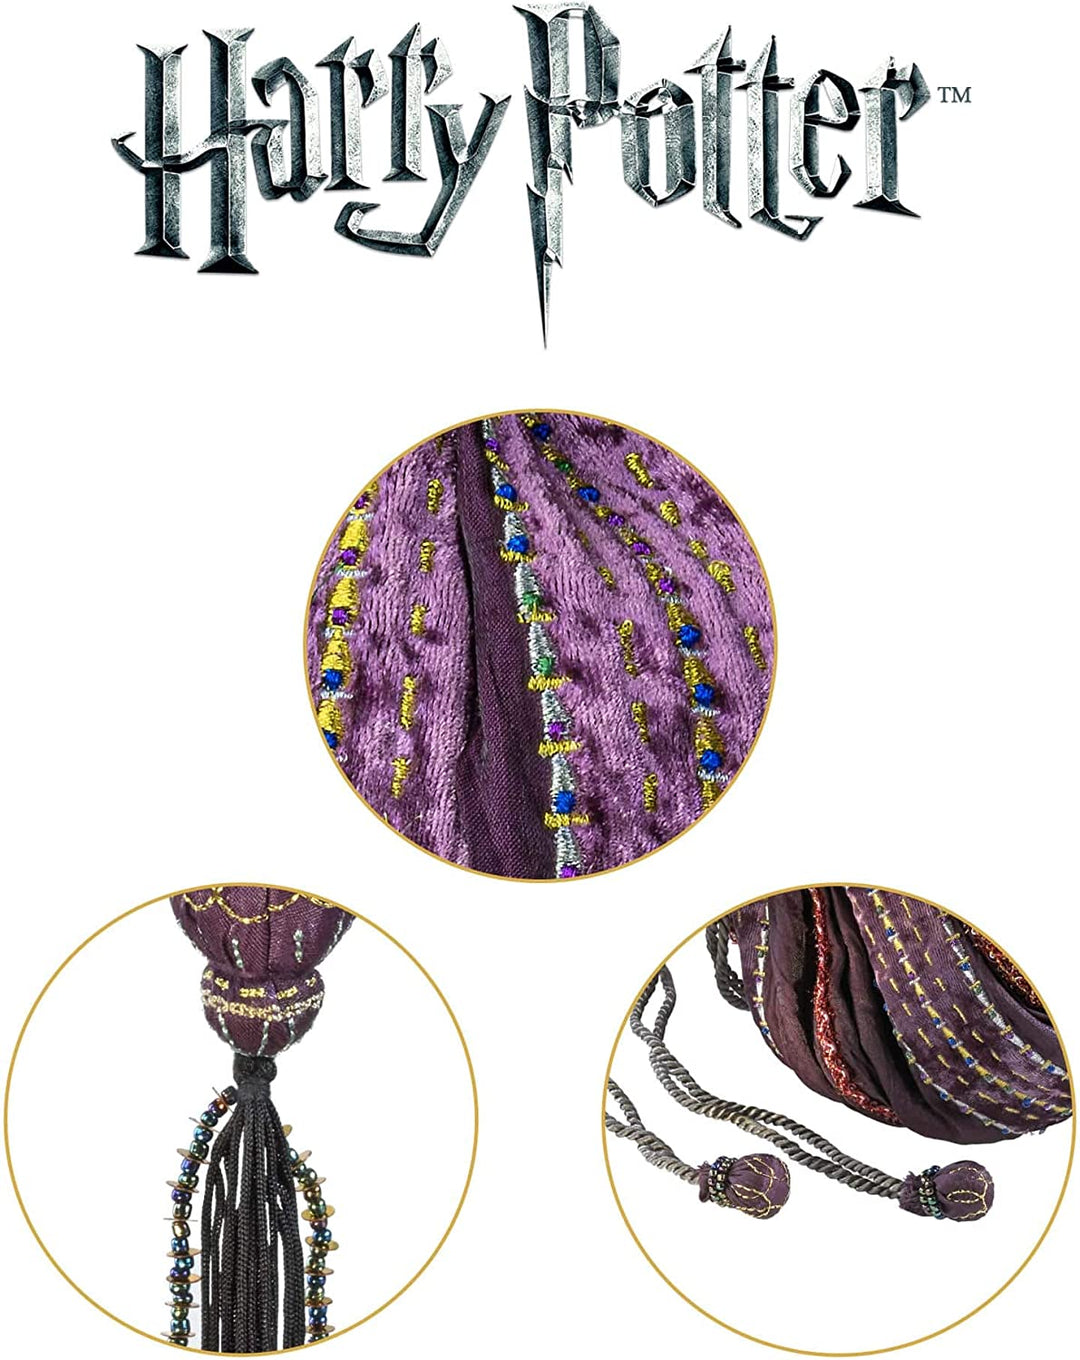 The Noble Collection Hermione Granger Bag - 8in (20cm) Small Purple Hermione Bag - Officially Licensed Harry Potter Film Set Movie Toy - Gifts for Family, Friends & Harry Potter Fans